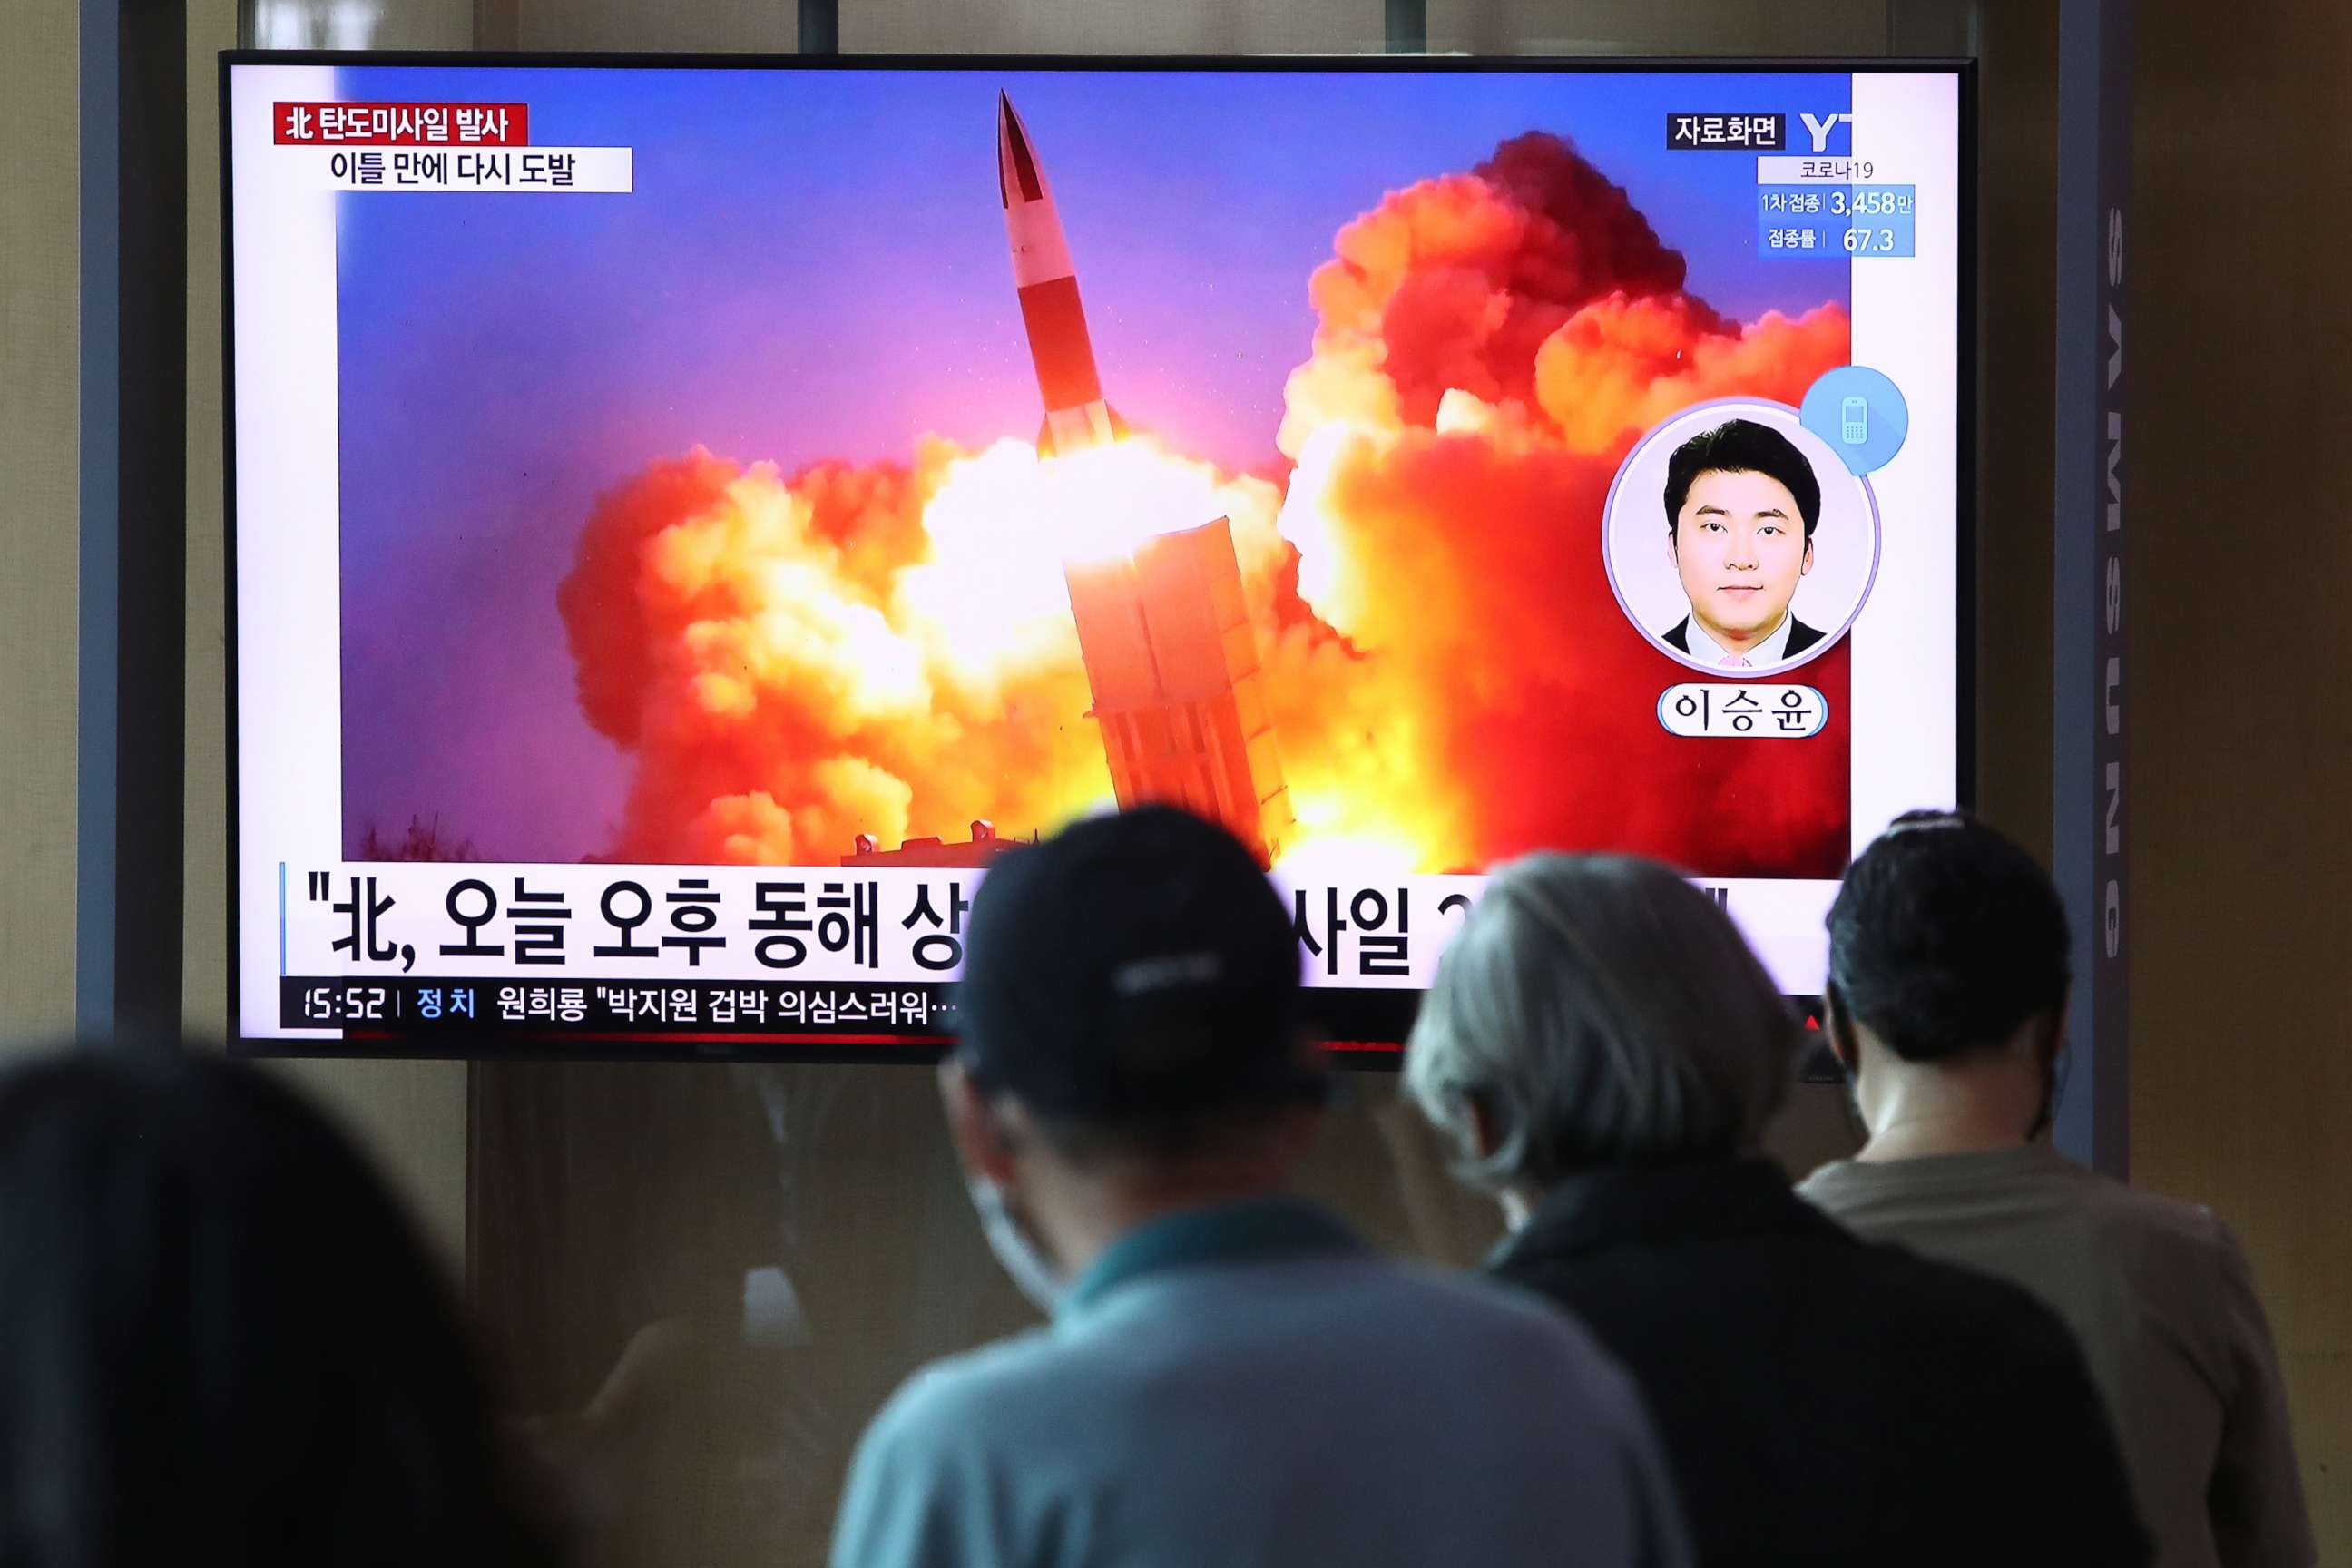 PHOTO: People watch a television at the Seoul railway station, showing a file image of a North Korean missile launch, in Seoul, South Korea, on Sept. 15, 2021.